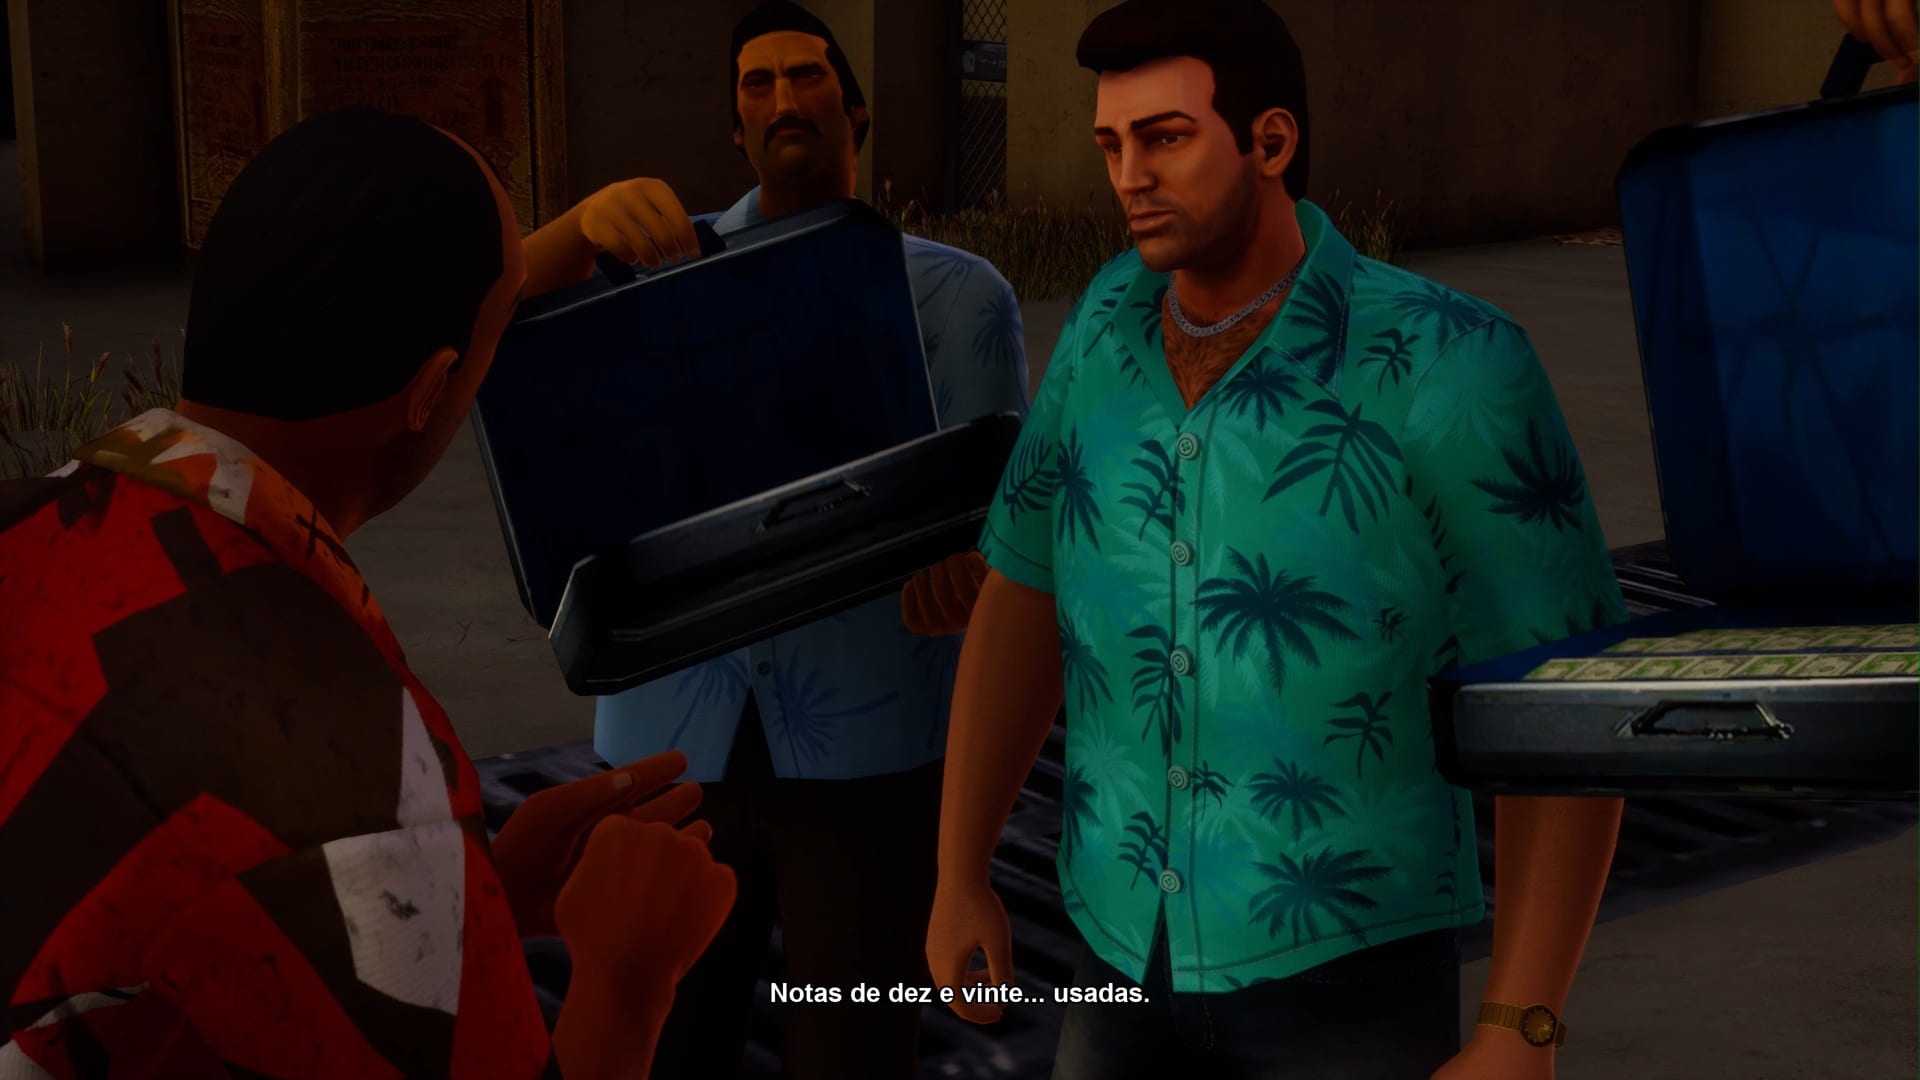 Grand Theft Auto Vice City – The Definitive Edition